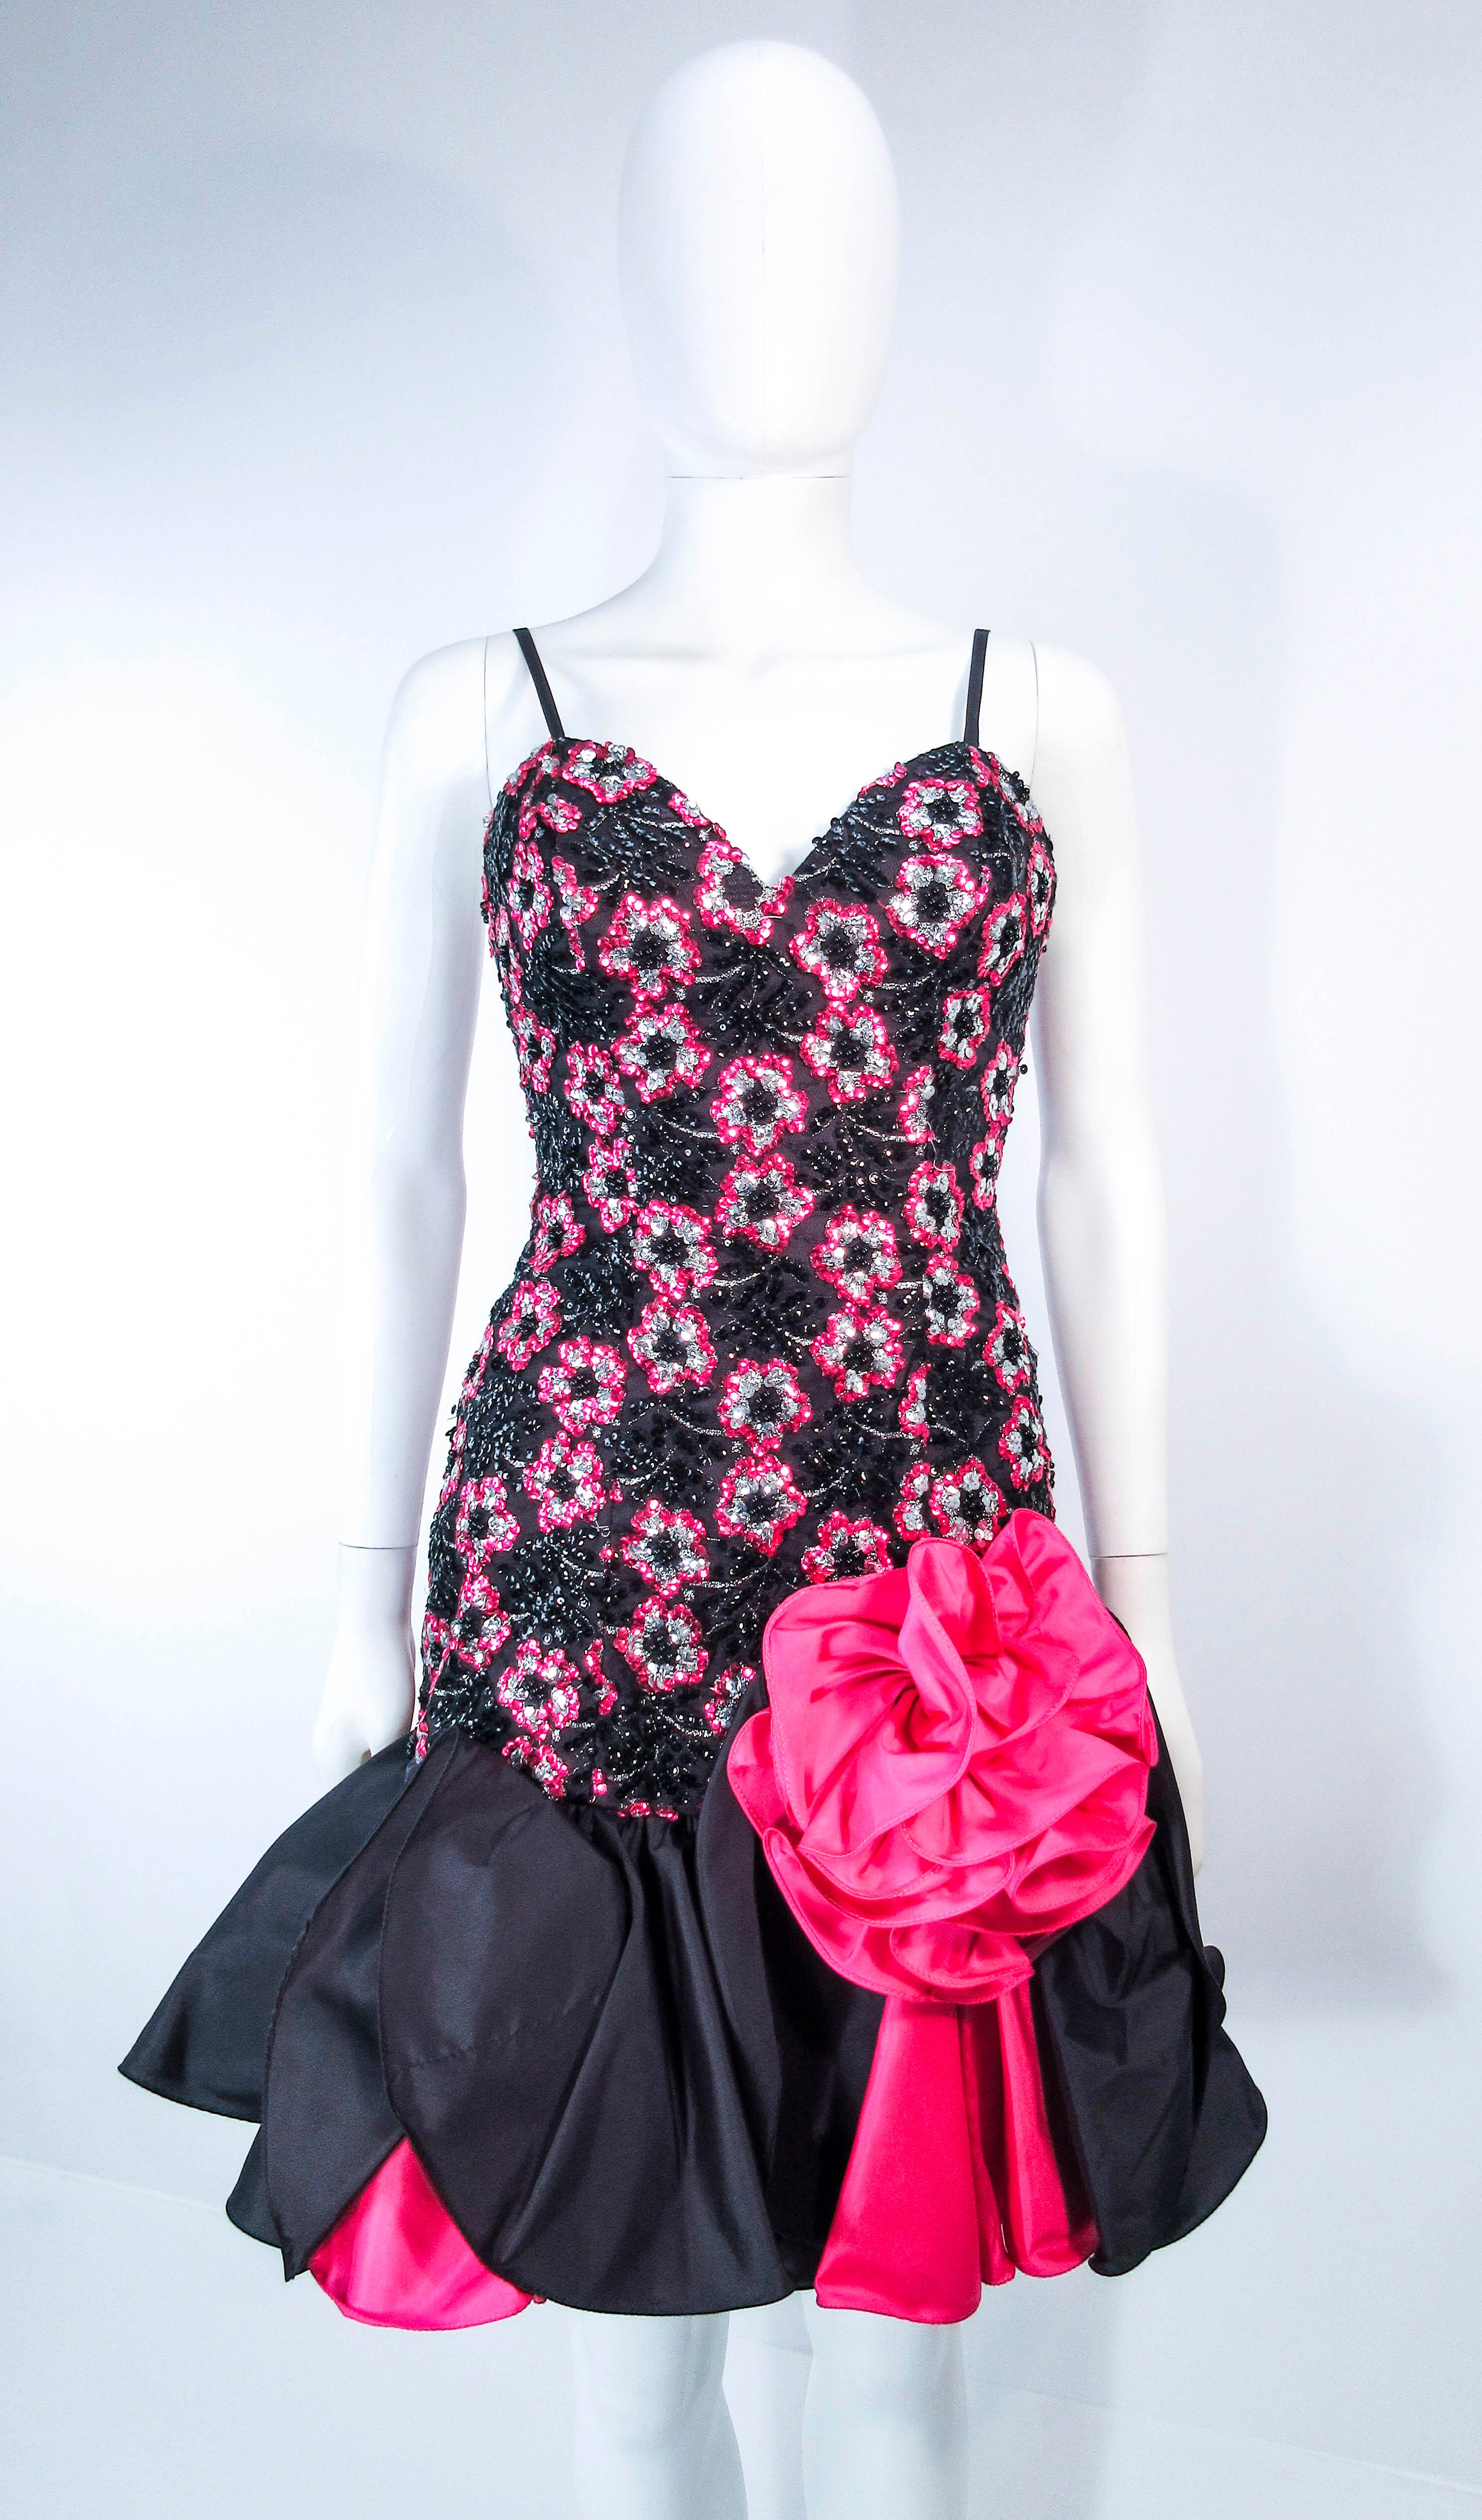 This vintage 1980's cocktail dress is composed of black and pink sequins with cascading ruffles throughout. Features spaghetti straps and a large front flower applique form fitting shape to the flared hem. There is a center back zipper closure. In